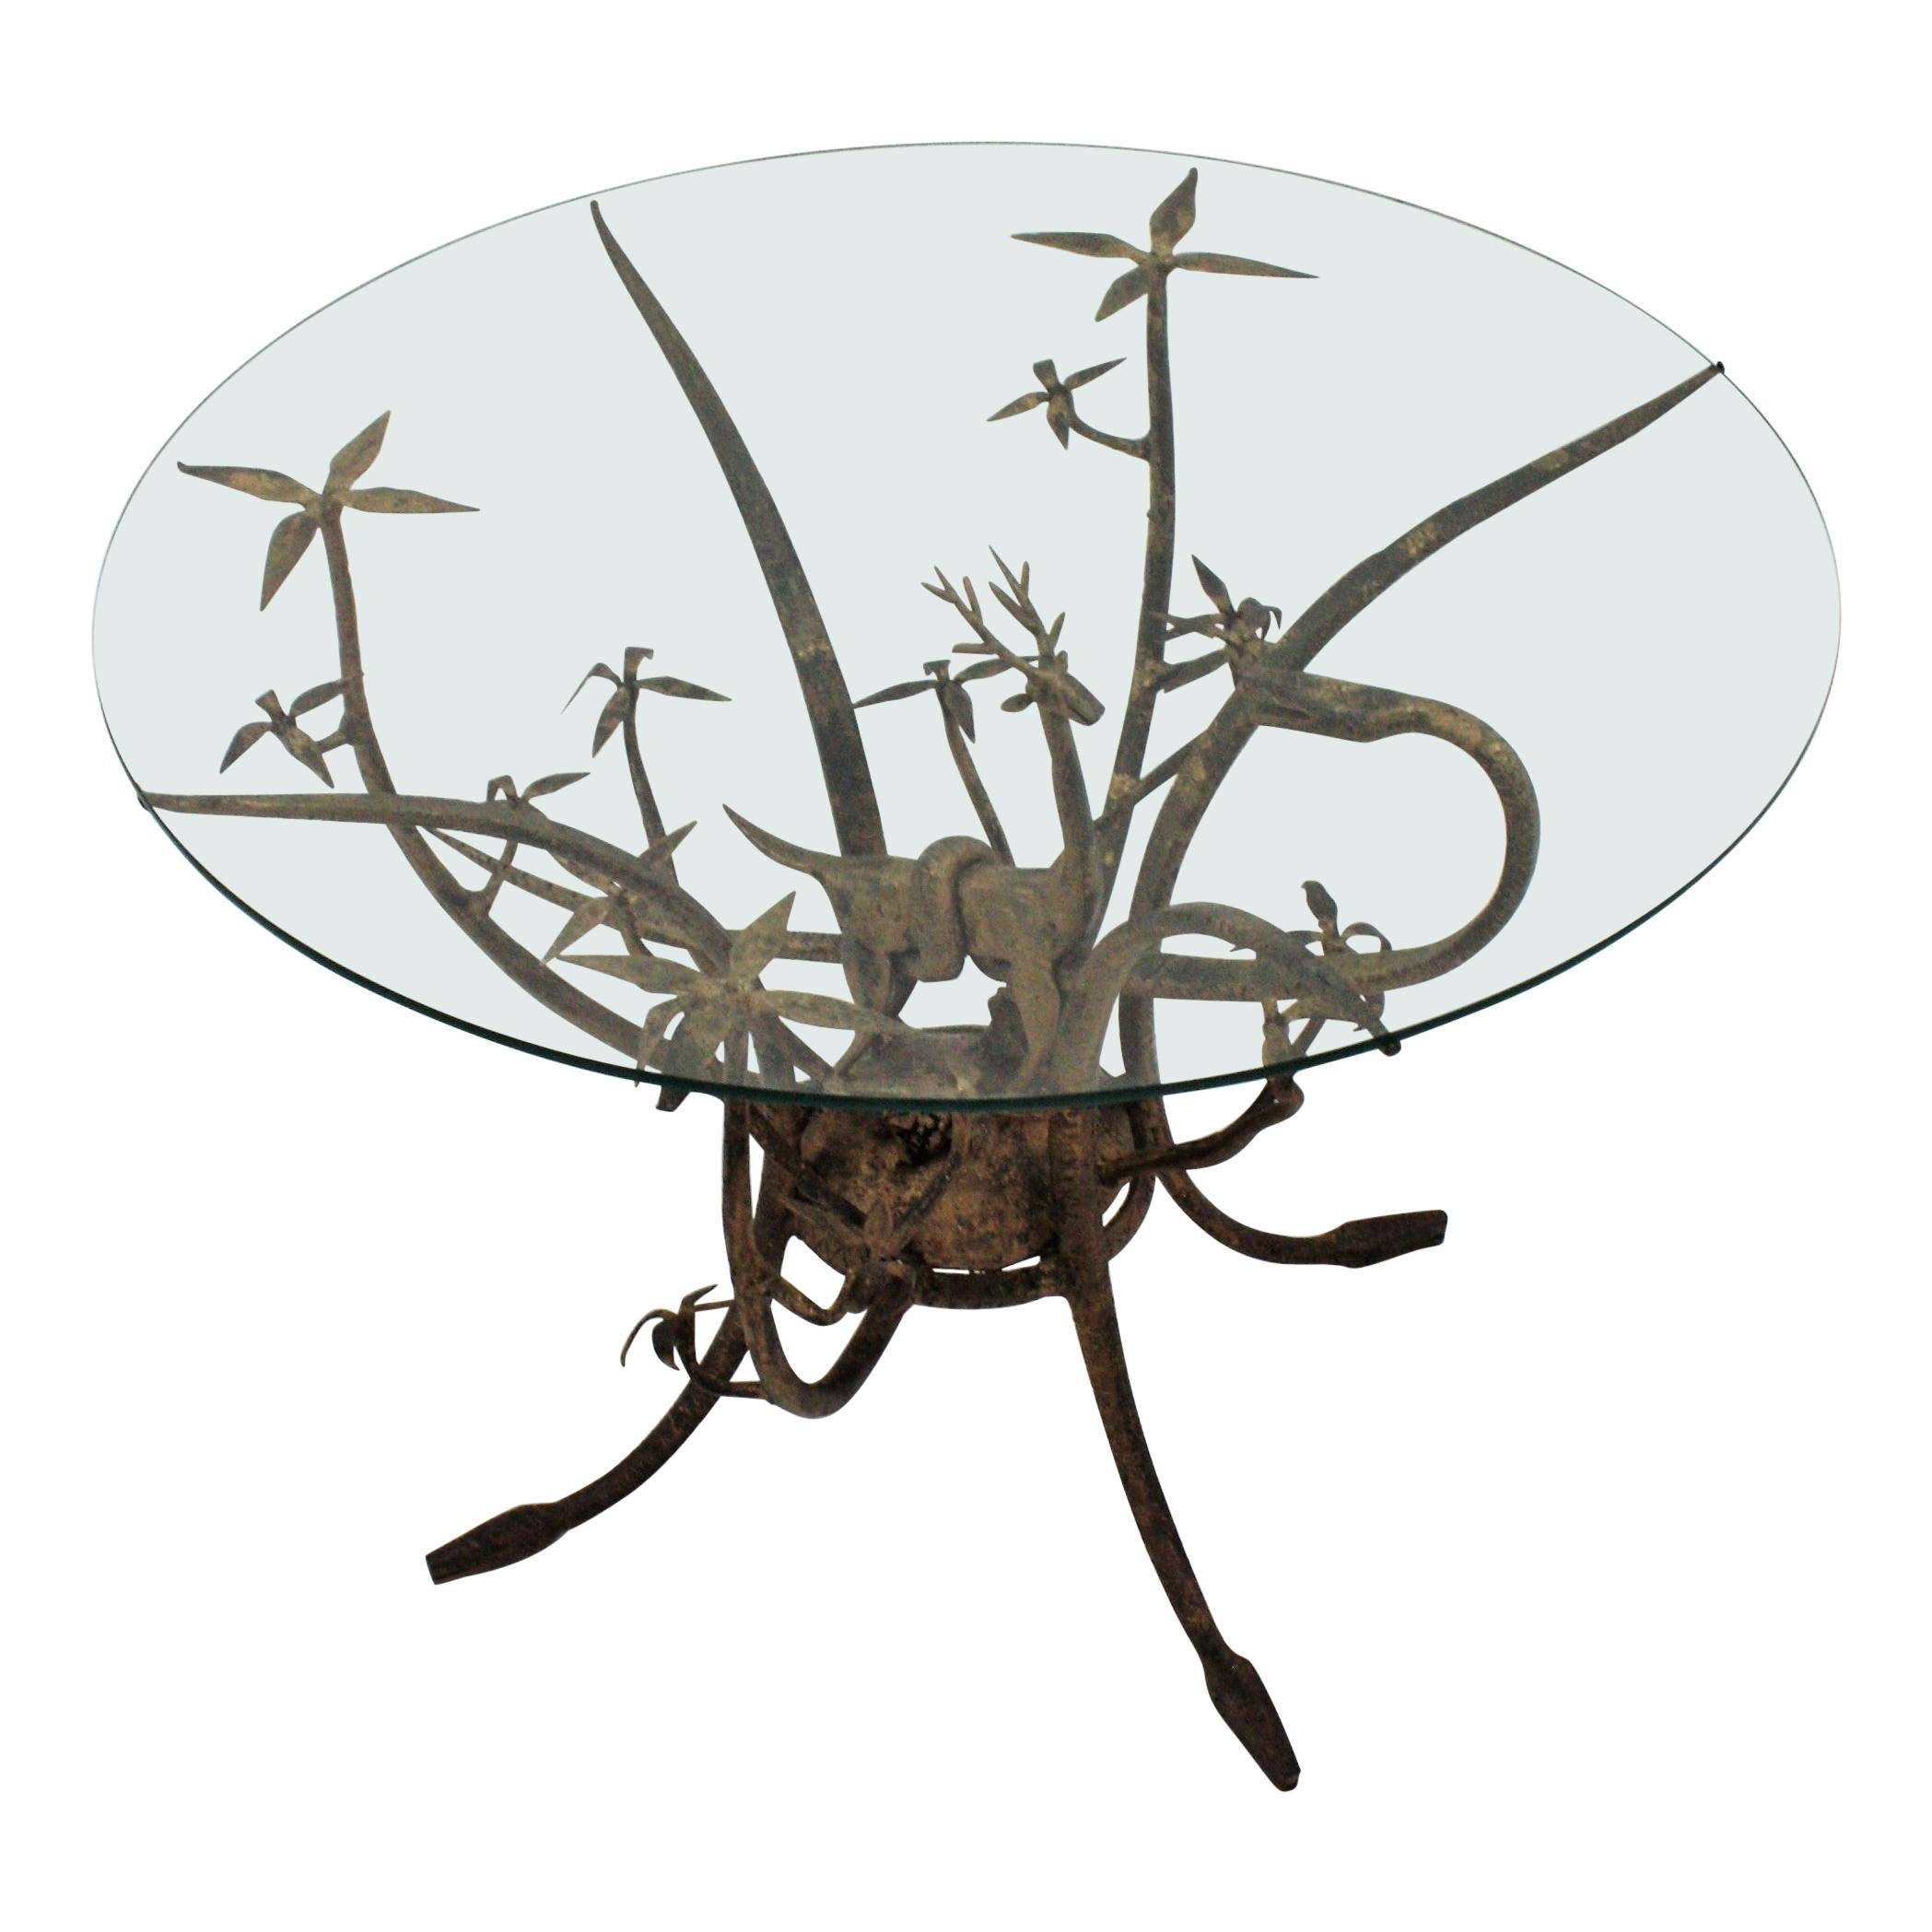 Wrought Iron Table with Figural Animals, France, 1960s.
One of a kind hand forged iron table with snakes and deer design and foliage accents.
Very much a work of art, as well as functional furniture, this wrought iron coffee table has a gourgeous